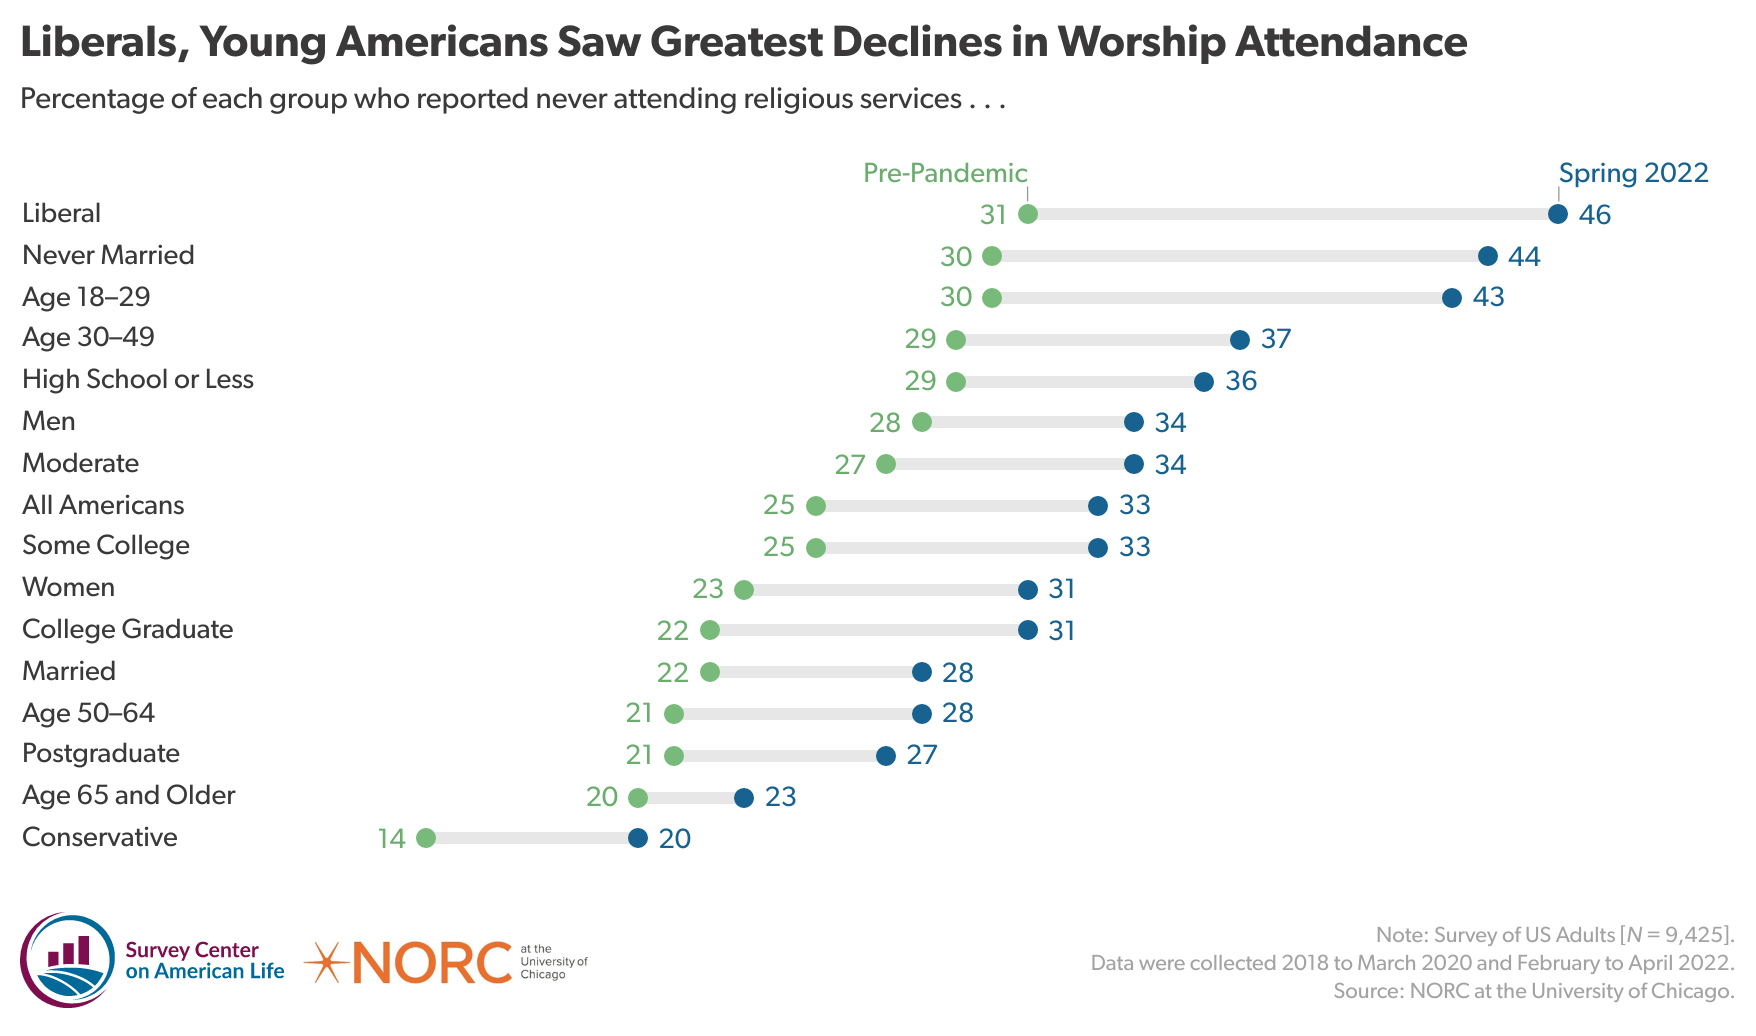 "Liberals, Young Americans Saw Greates Declines in Worship Attendance" Graphic courtesy of American Enterprise Institute